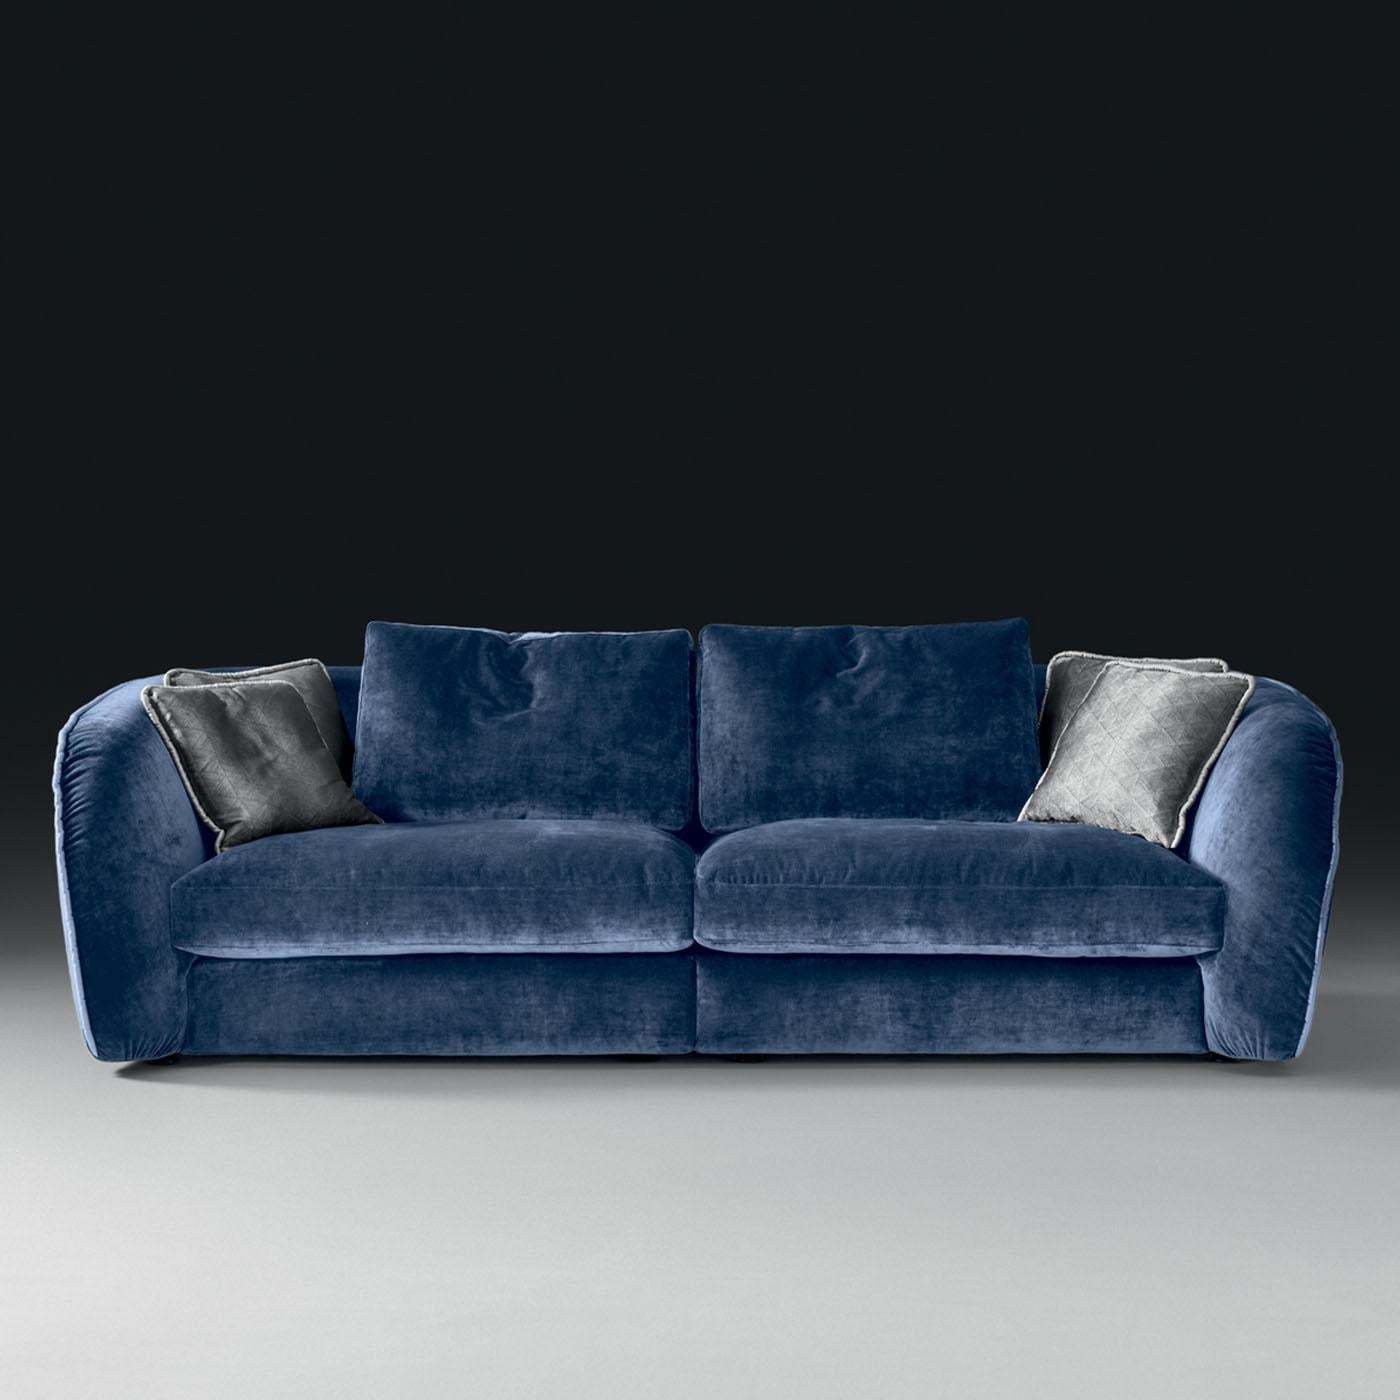 Exuding a retro-chic profile, this sofa is a combination of elegance and comfort. It boasts a poplar structure equipped with an elastic belt spring system, that is padded with thermo-bonded fiber and flexible jersey fabric. The two-seat and back